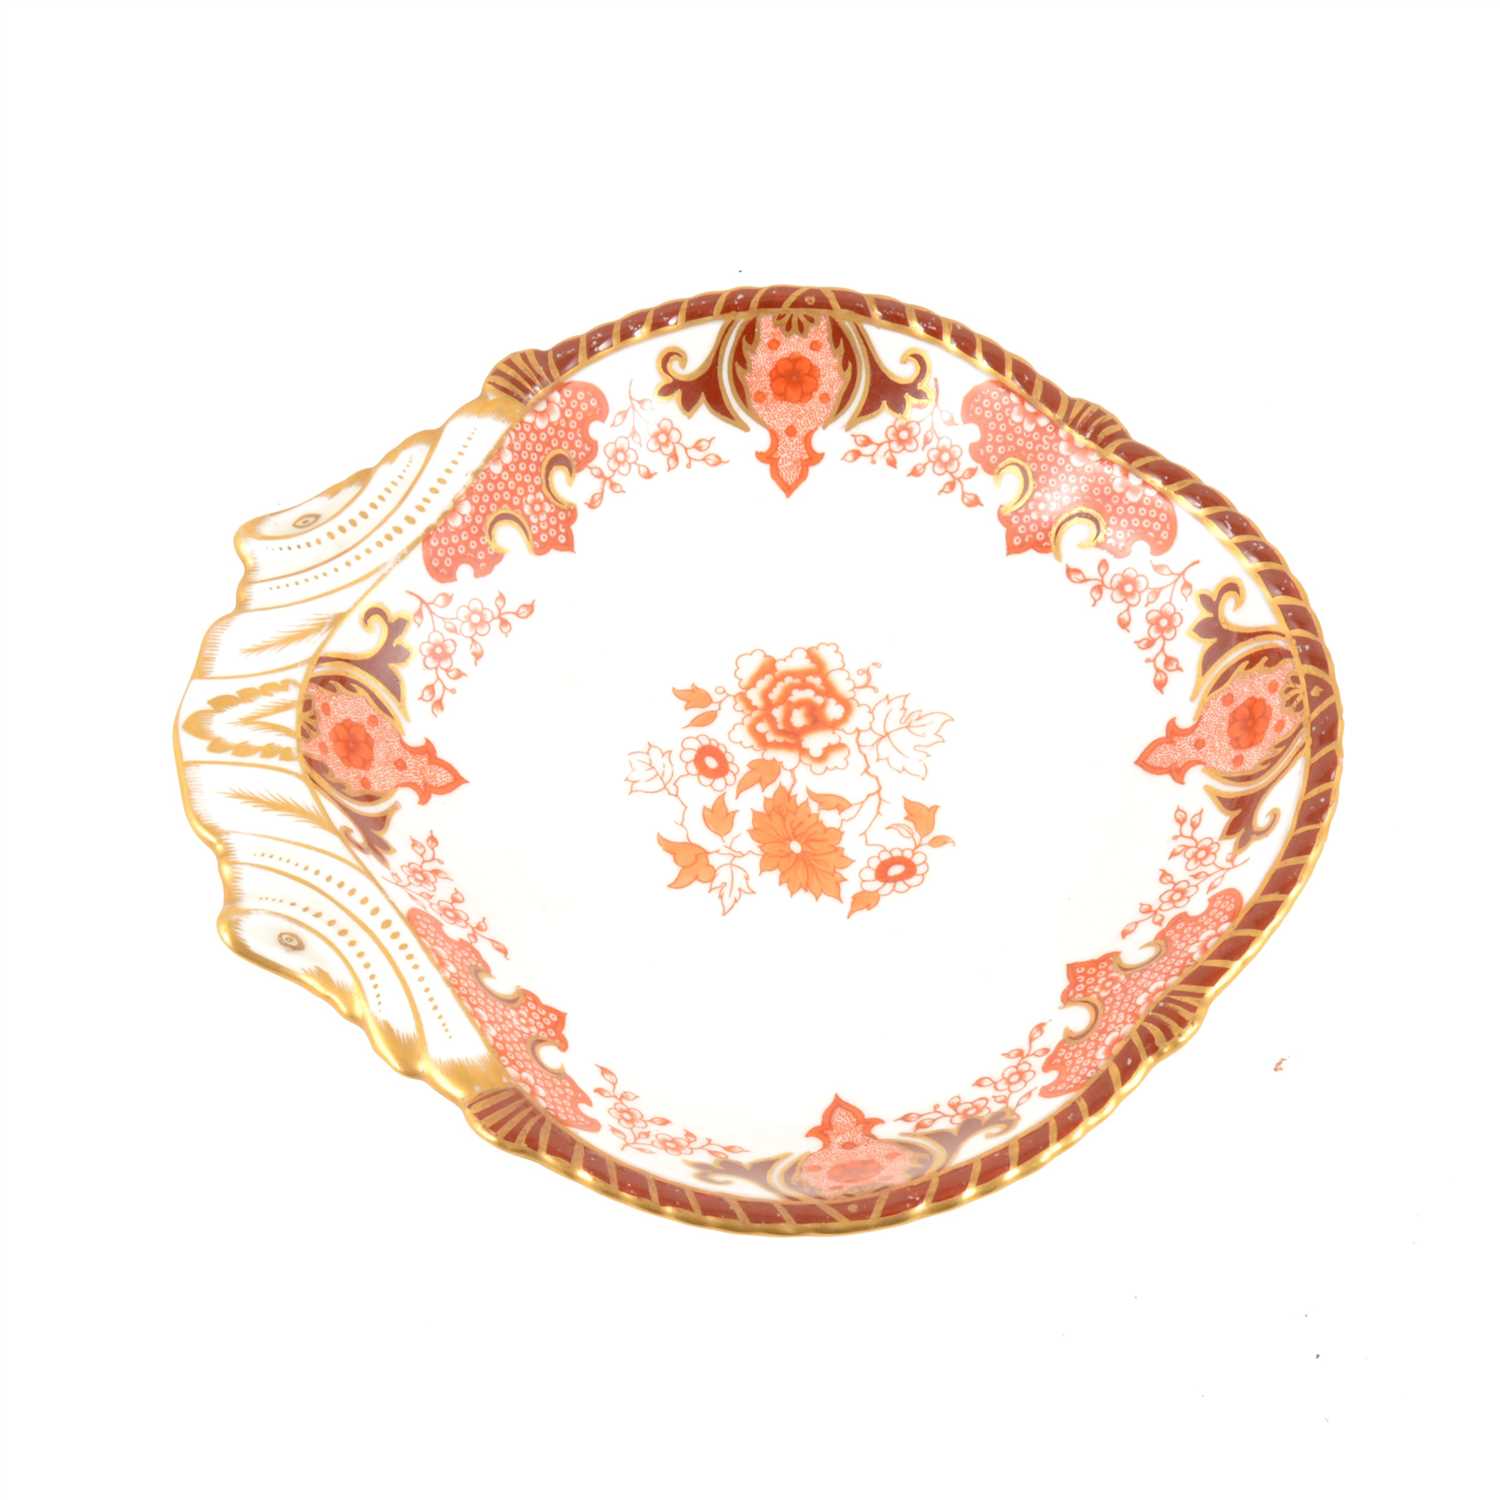 Lot 36 - A Royal Crown Derby porcelain dessert dish, puce floral decoration with gilded highlights, date cipher for 1889, pattern 2108, 23.5cm.